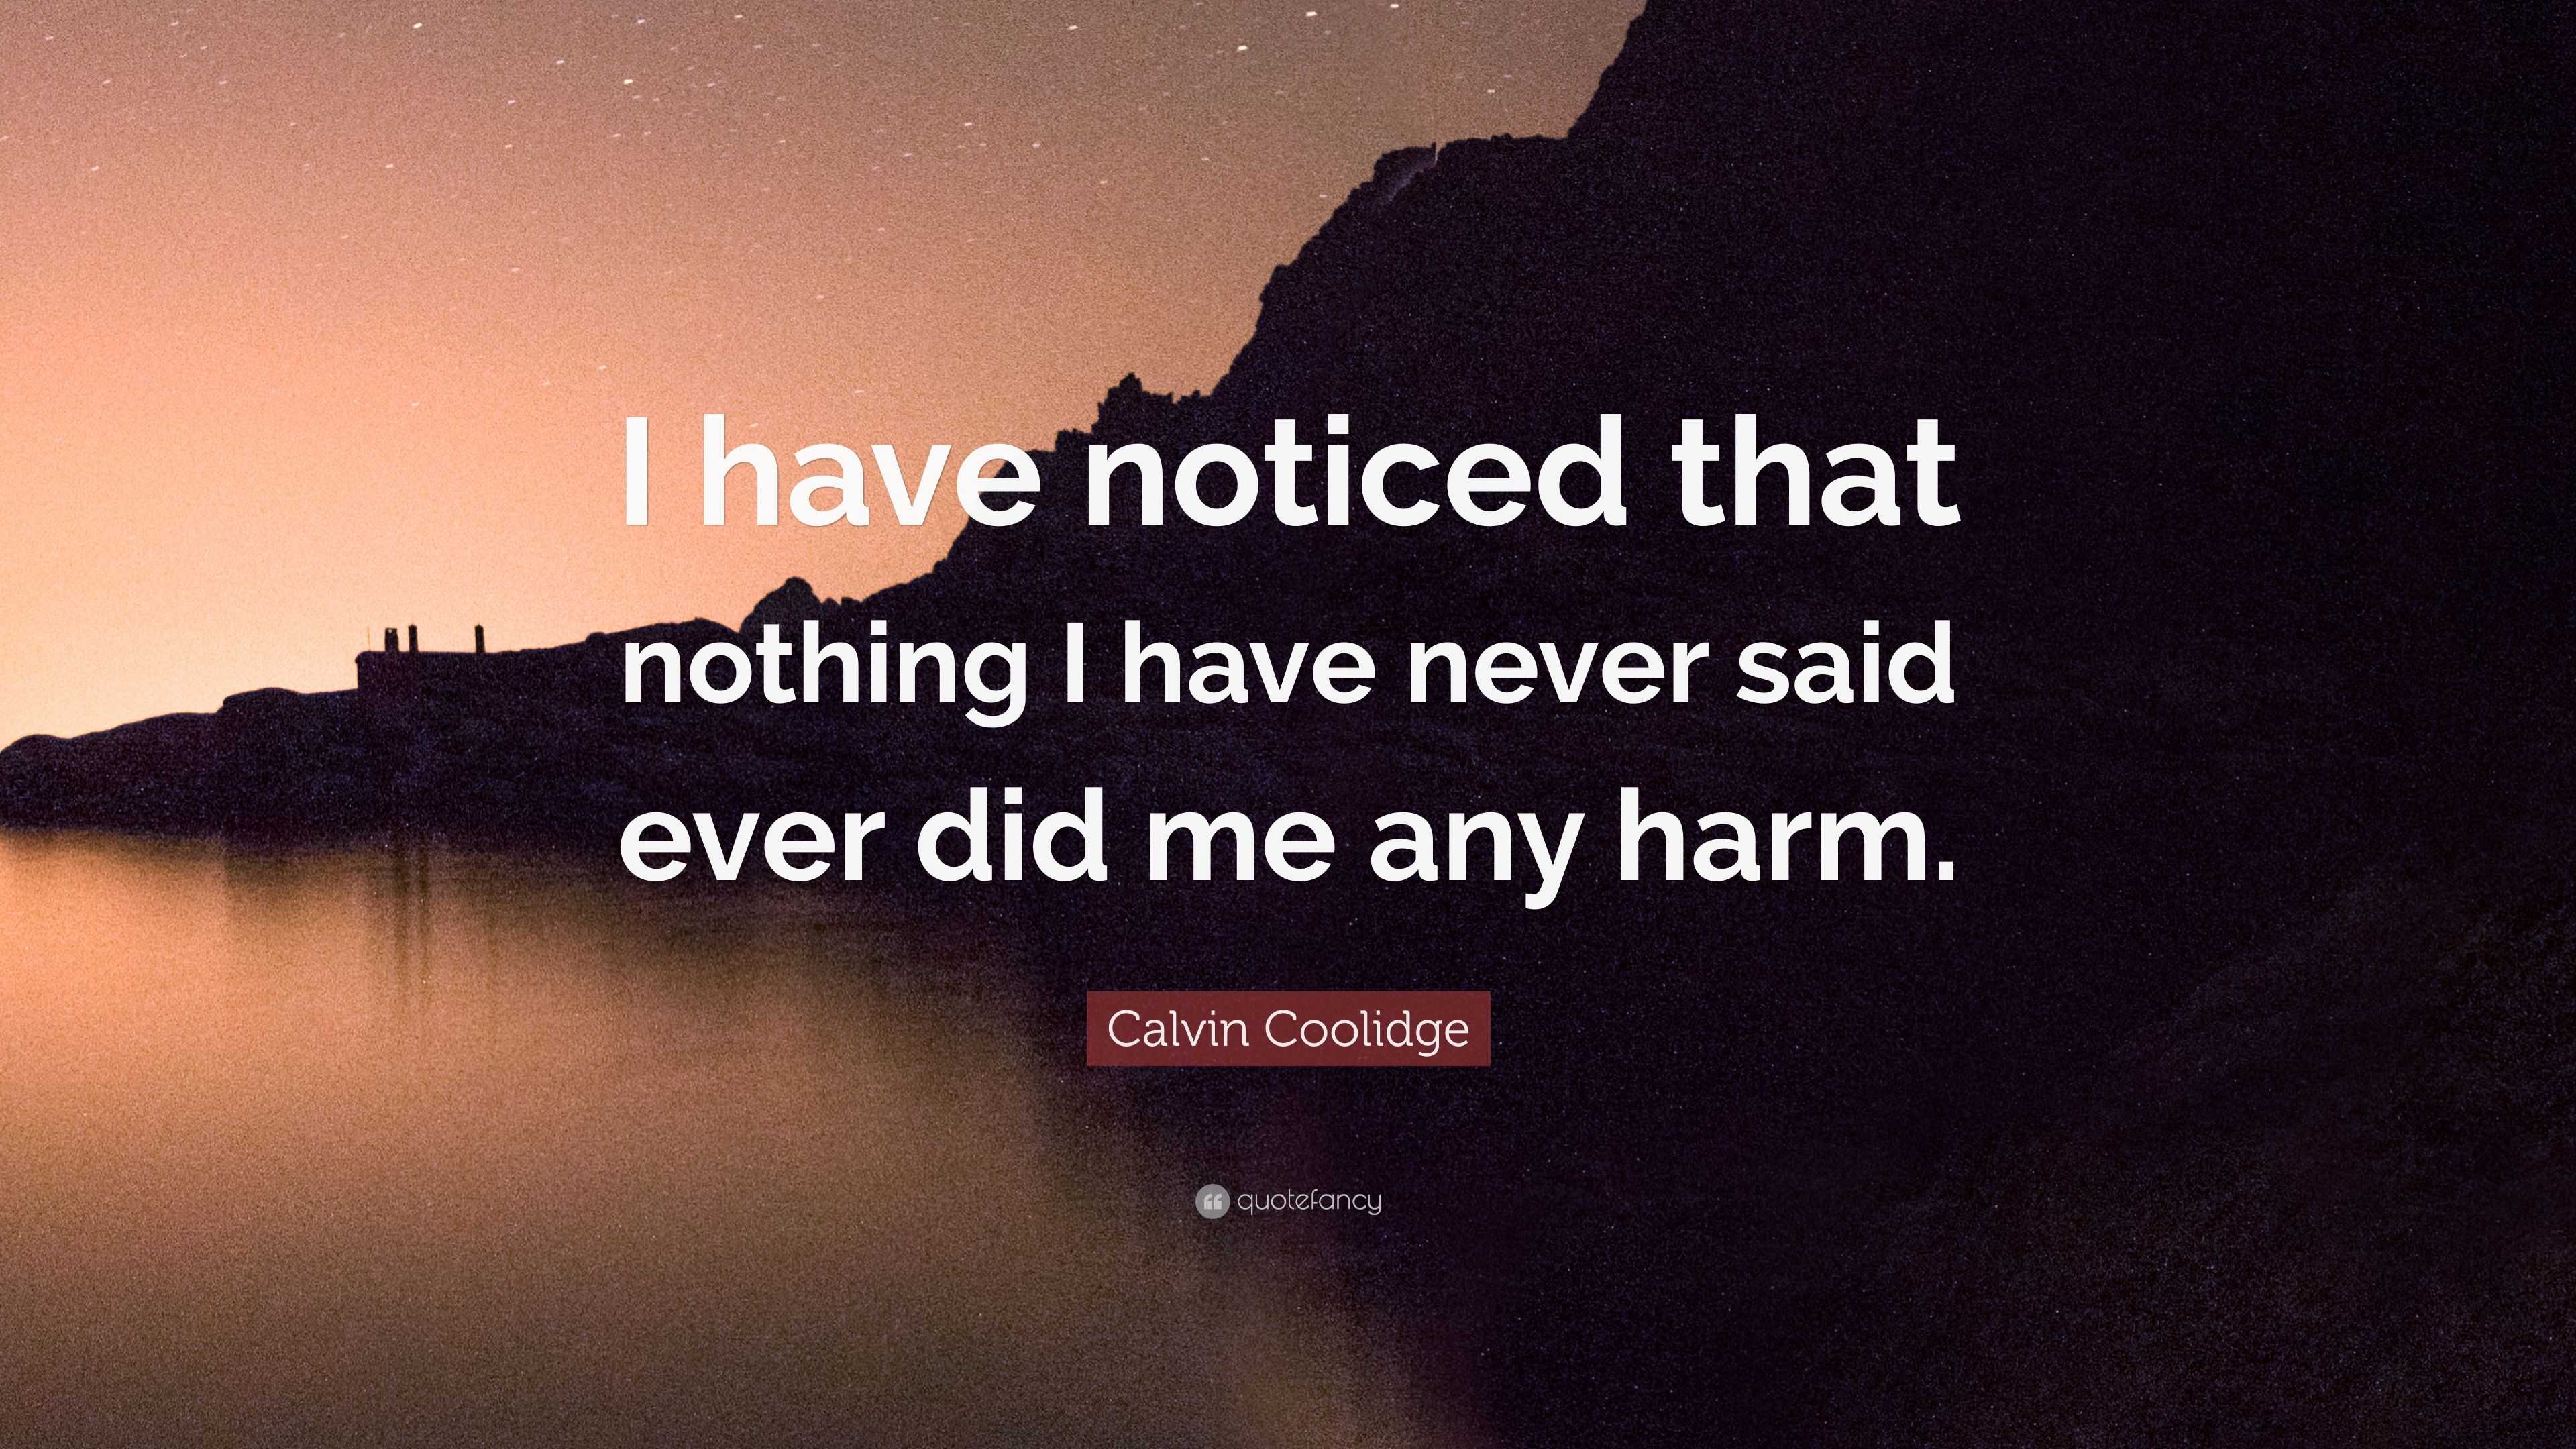 Calvin Coolidge Quote: “I have noticed that nothing I have never said ...